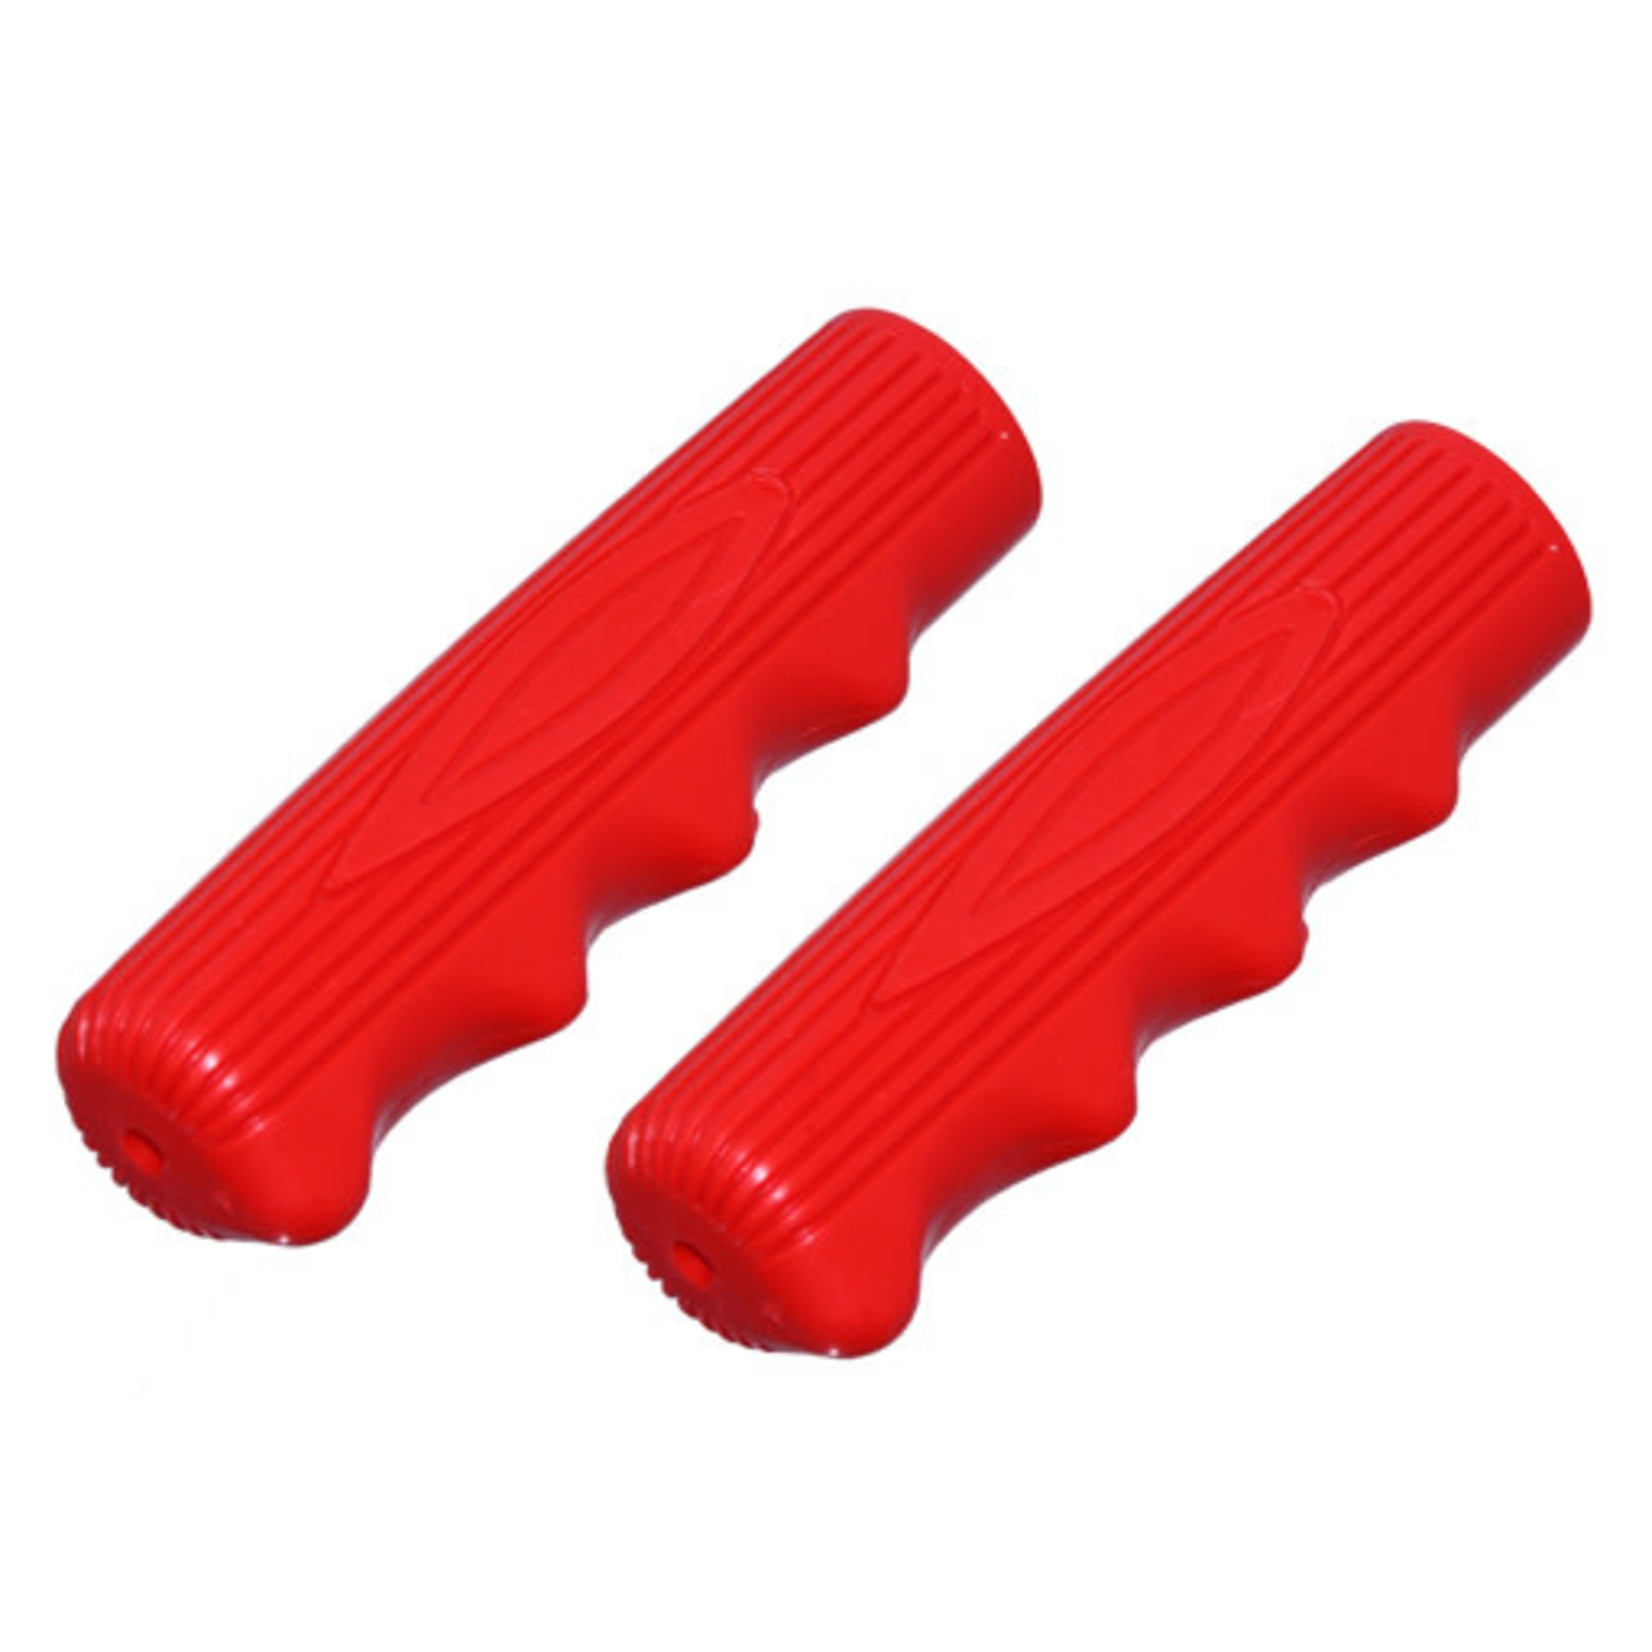 F&R Cycles Grips 7/8 Long 115mm Kraton Rubber 212 Red